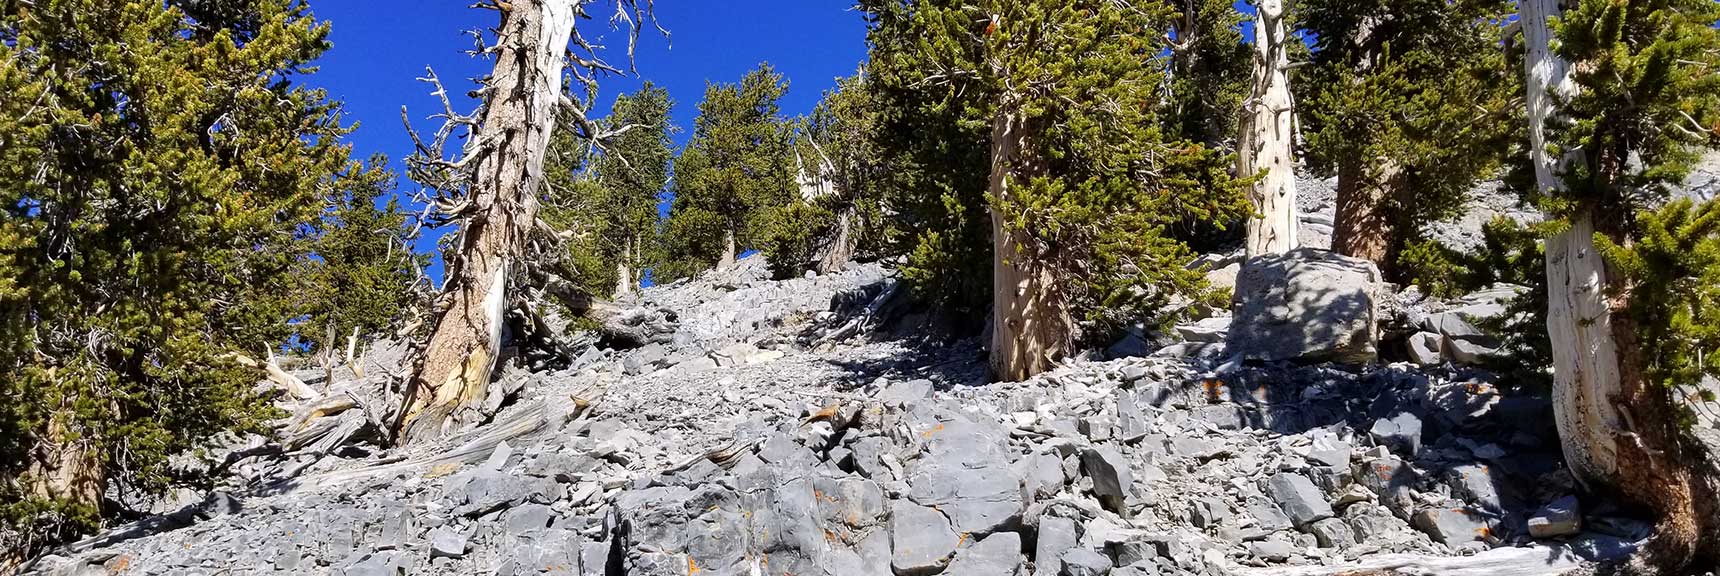 Looking up Lower Approach Route to Lee Peak in Kyle Canyon, Spring Mountains, Nevada Slide 001